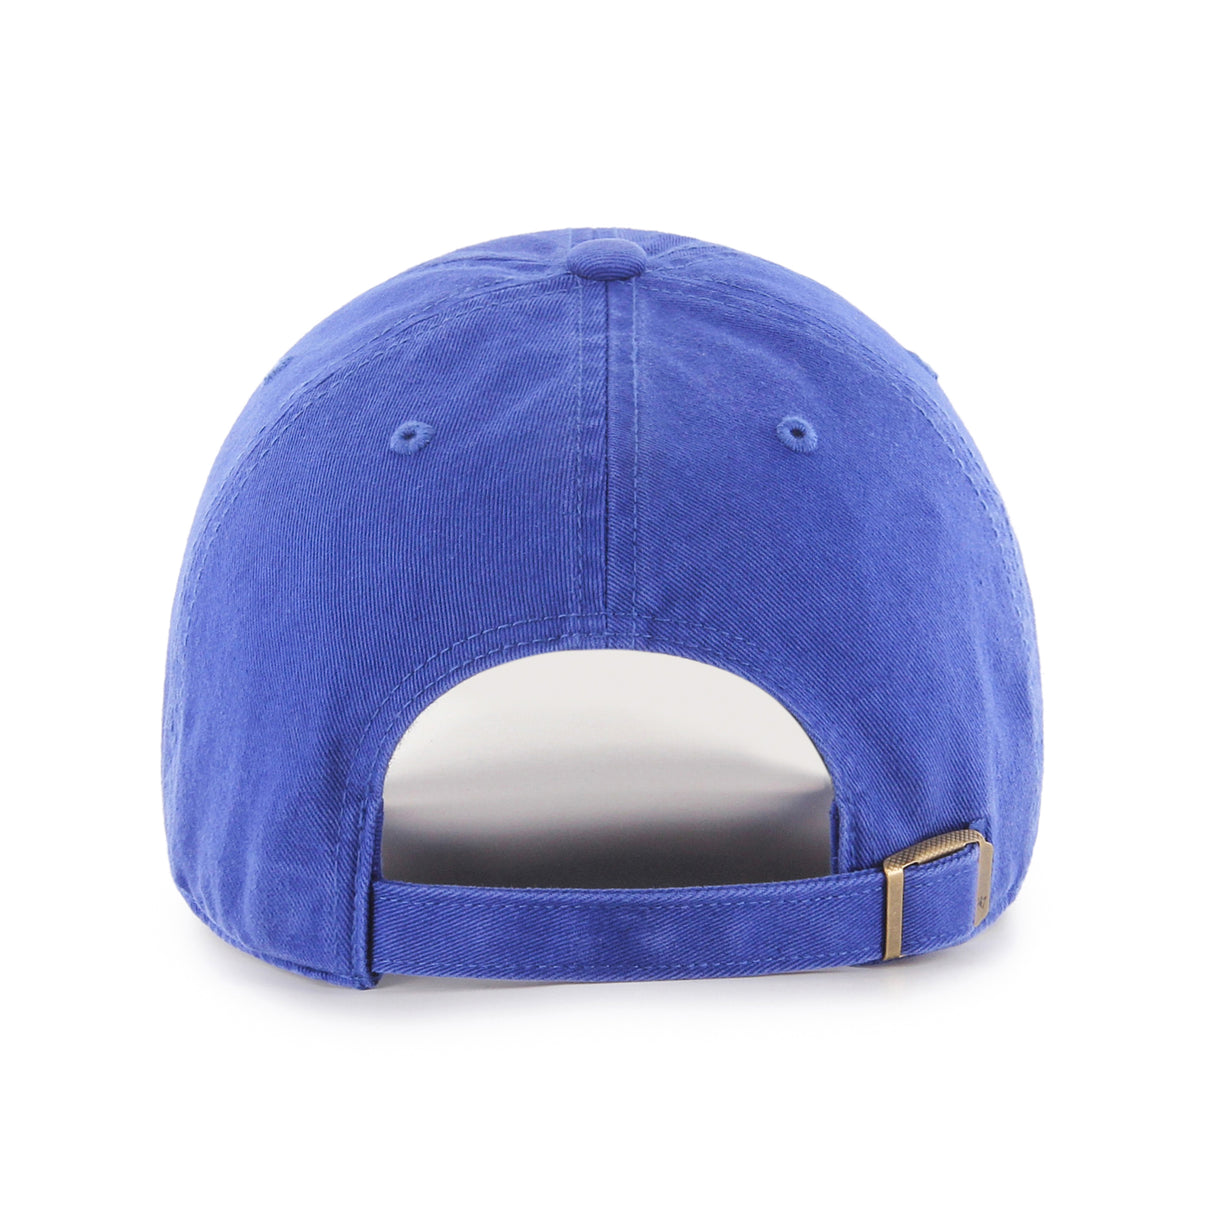 New York Knicks '47 Clean Up Hat